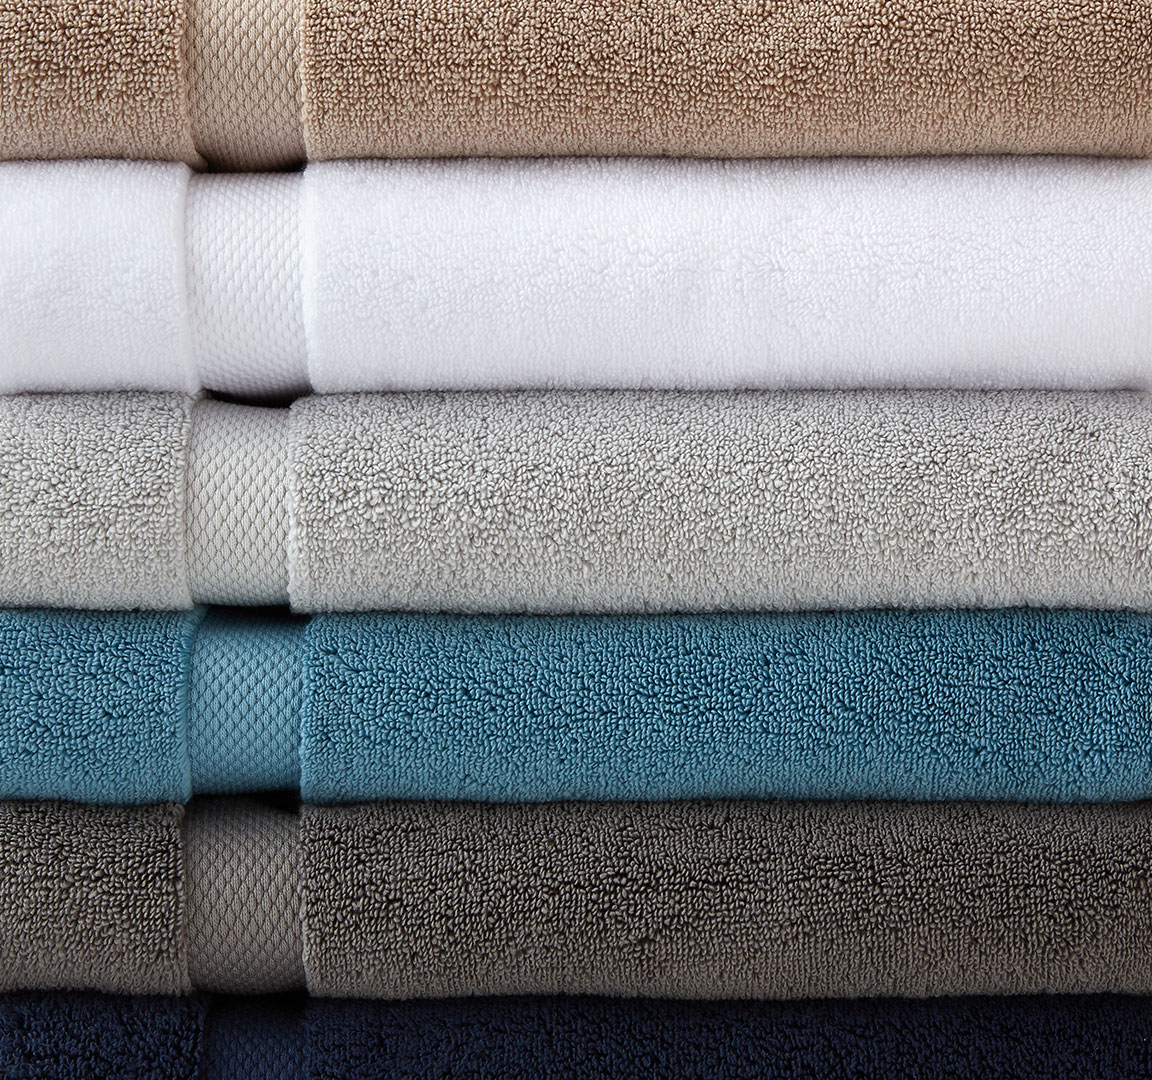 Stacked colored towels closeup photographed by still life photographer Kate Benson.